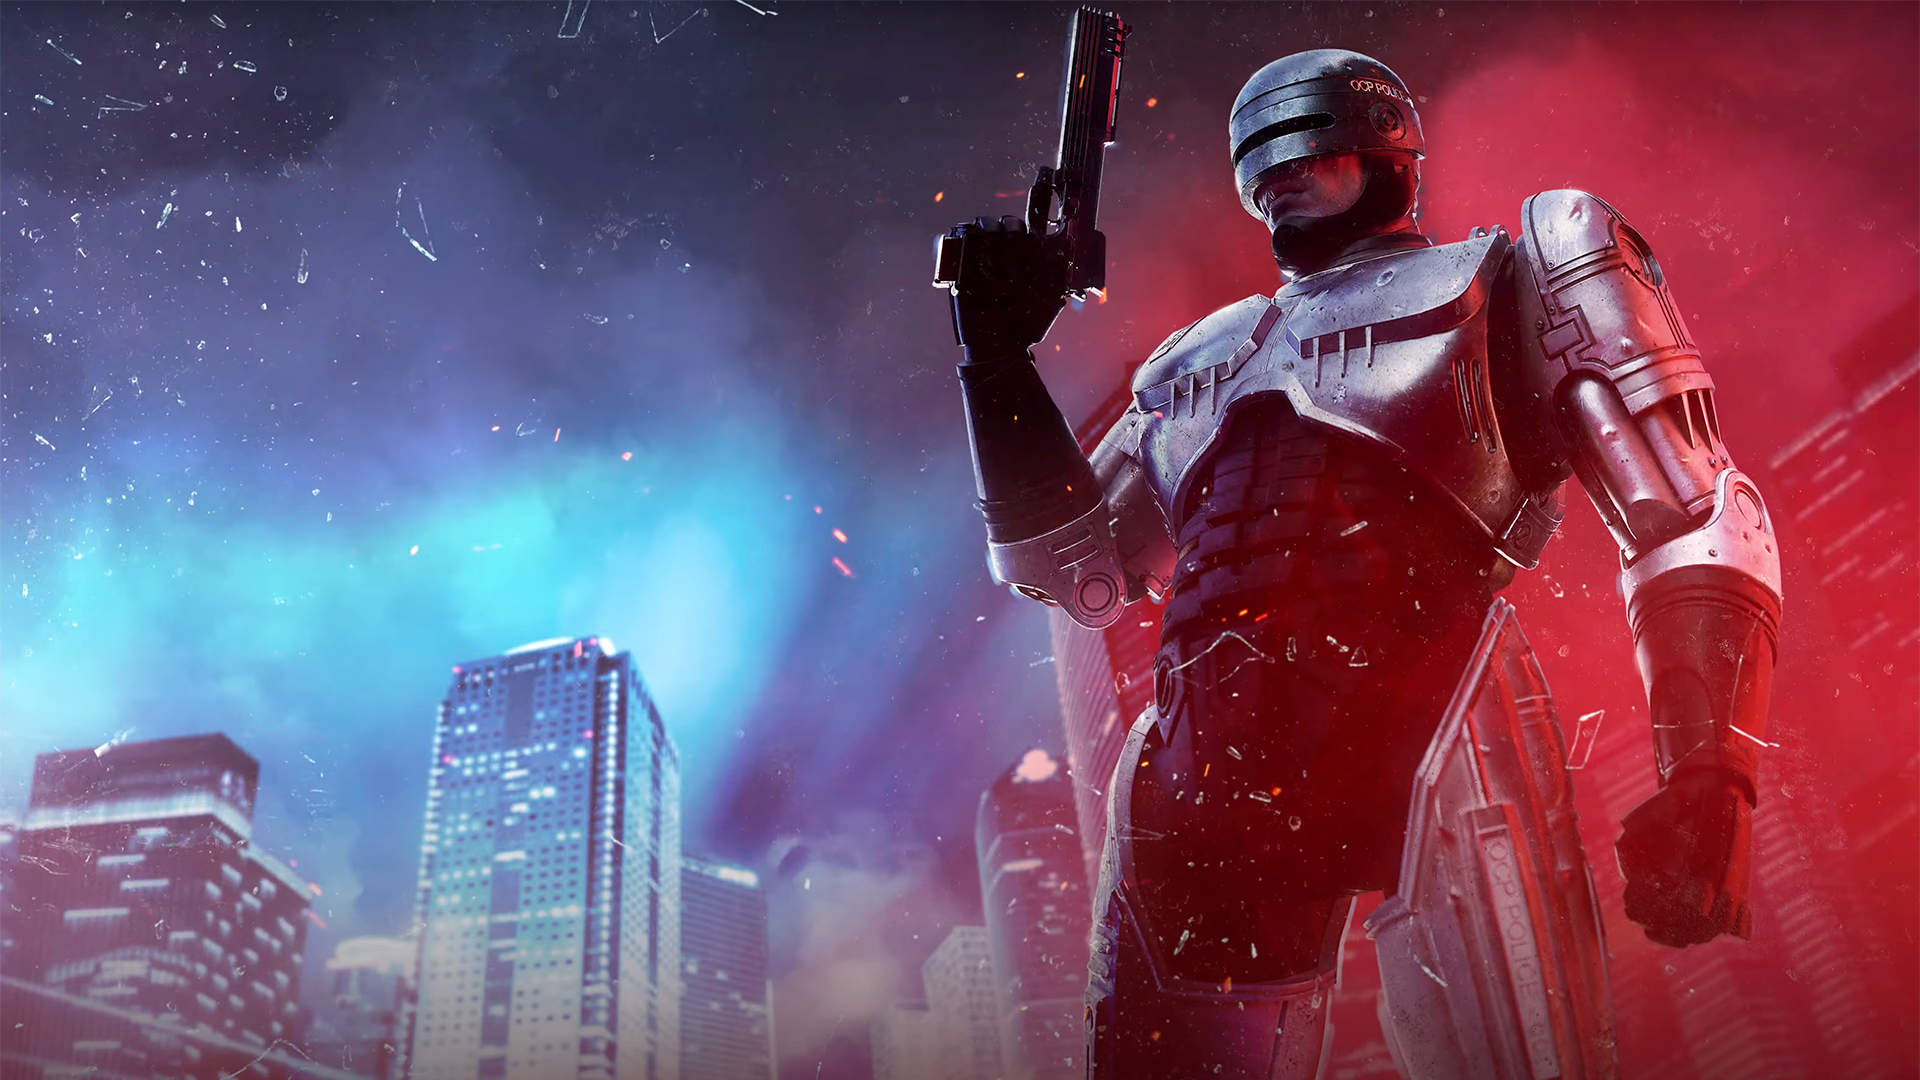 RoboCop returns to games with a gory new shooter in 2023